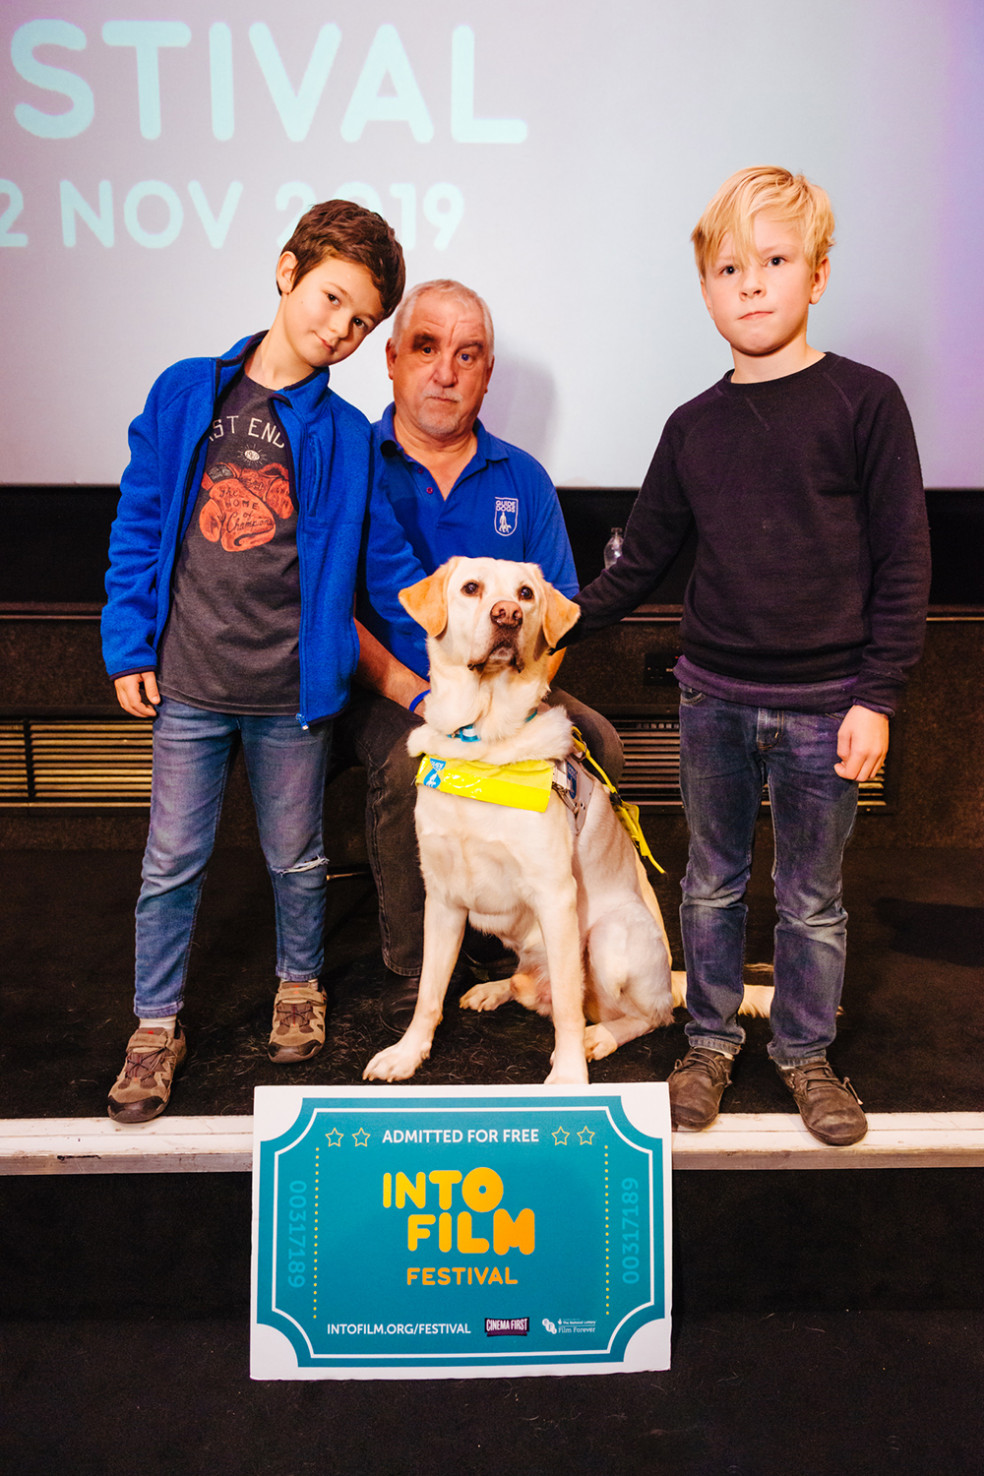 Guide Dogs' Dave Kent with two young attendees and his guide dog Chad